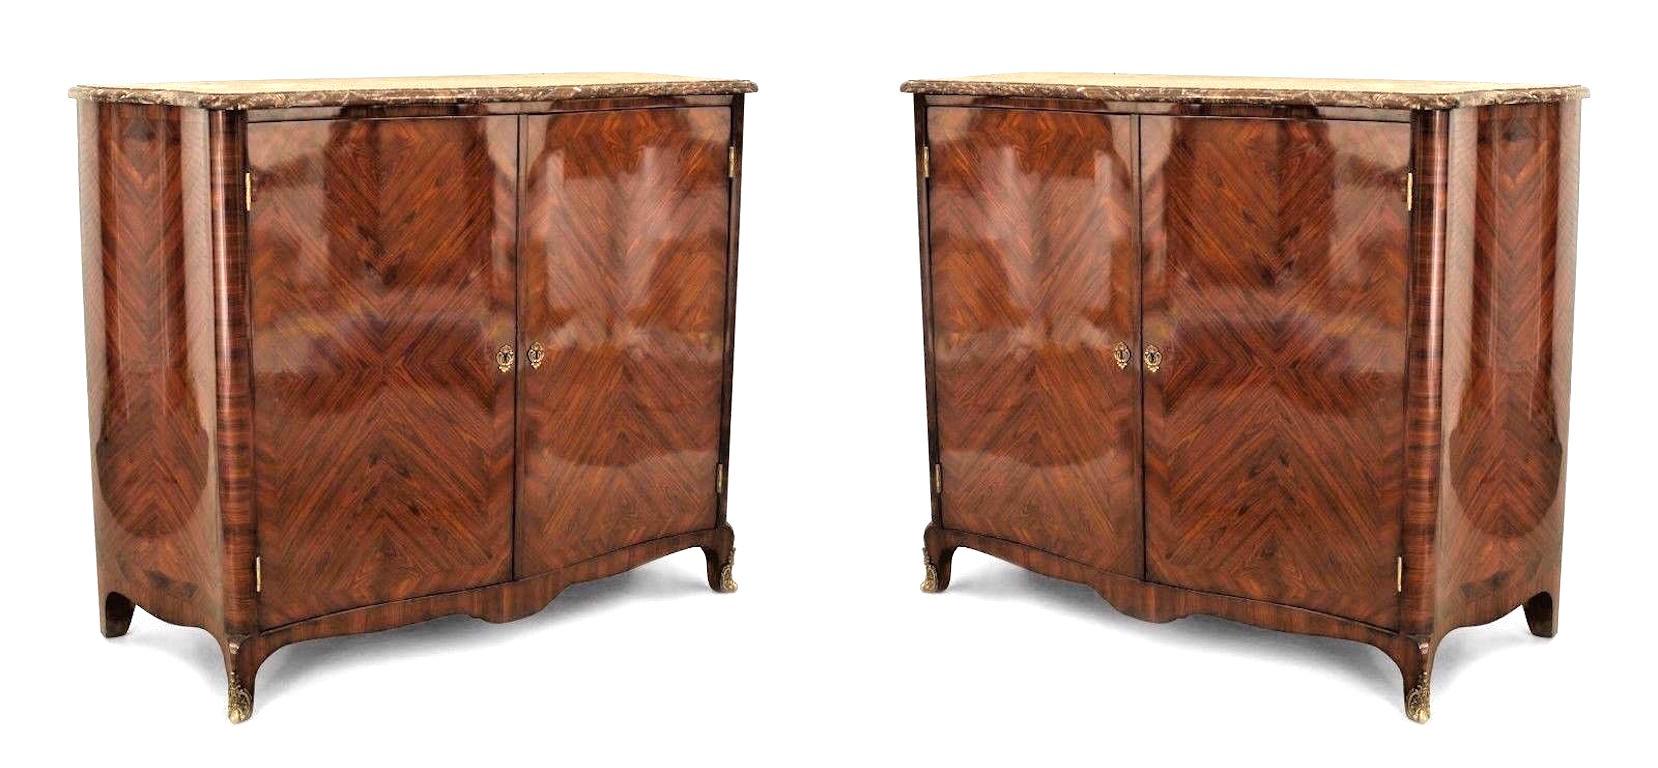 Pair of French Louis XV style (mid-19th Century) kingwood veneered serpentine shaped commodes with 2 front doors and a brown marble top with gilt bronze trim feet and escutcheons (PRICED AS Pair).
